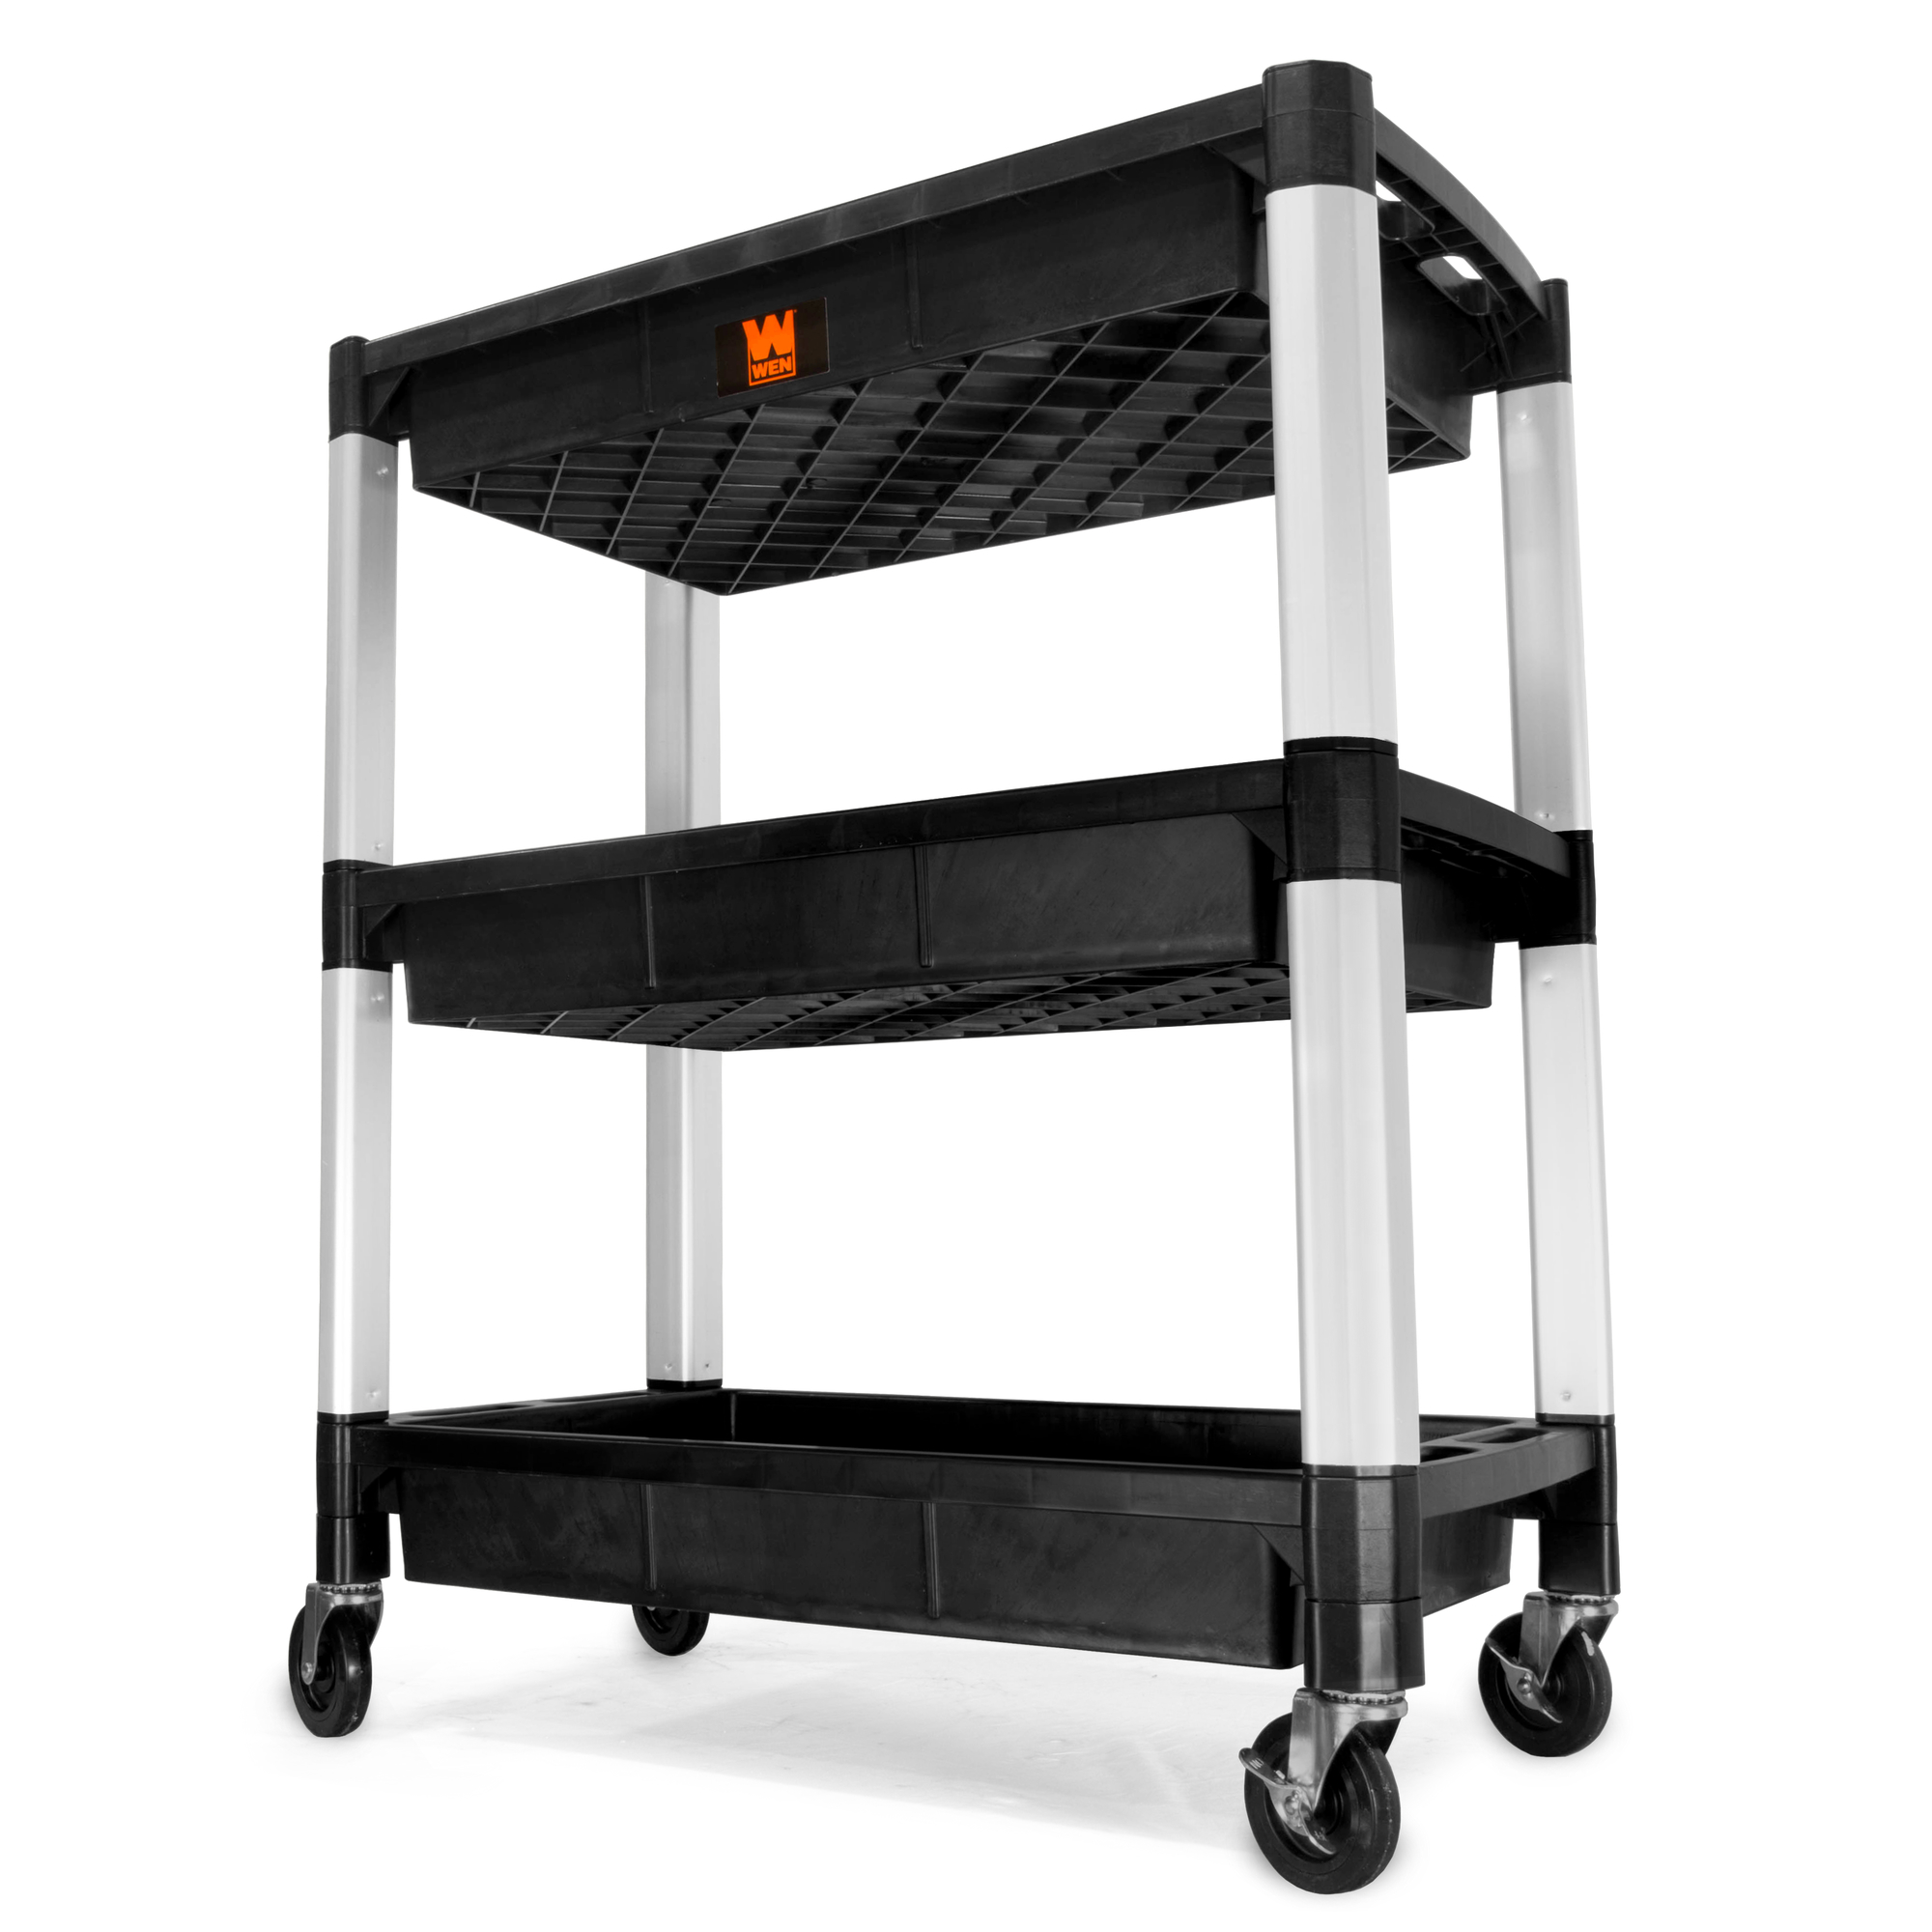 Three-Tray Triple Decker Service and Utility Cart, Total Capacity 300 lb, Shelves (qty.) 3 Material Polypropylene, Model - WEN 73163